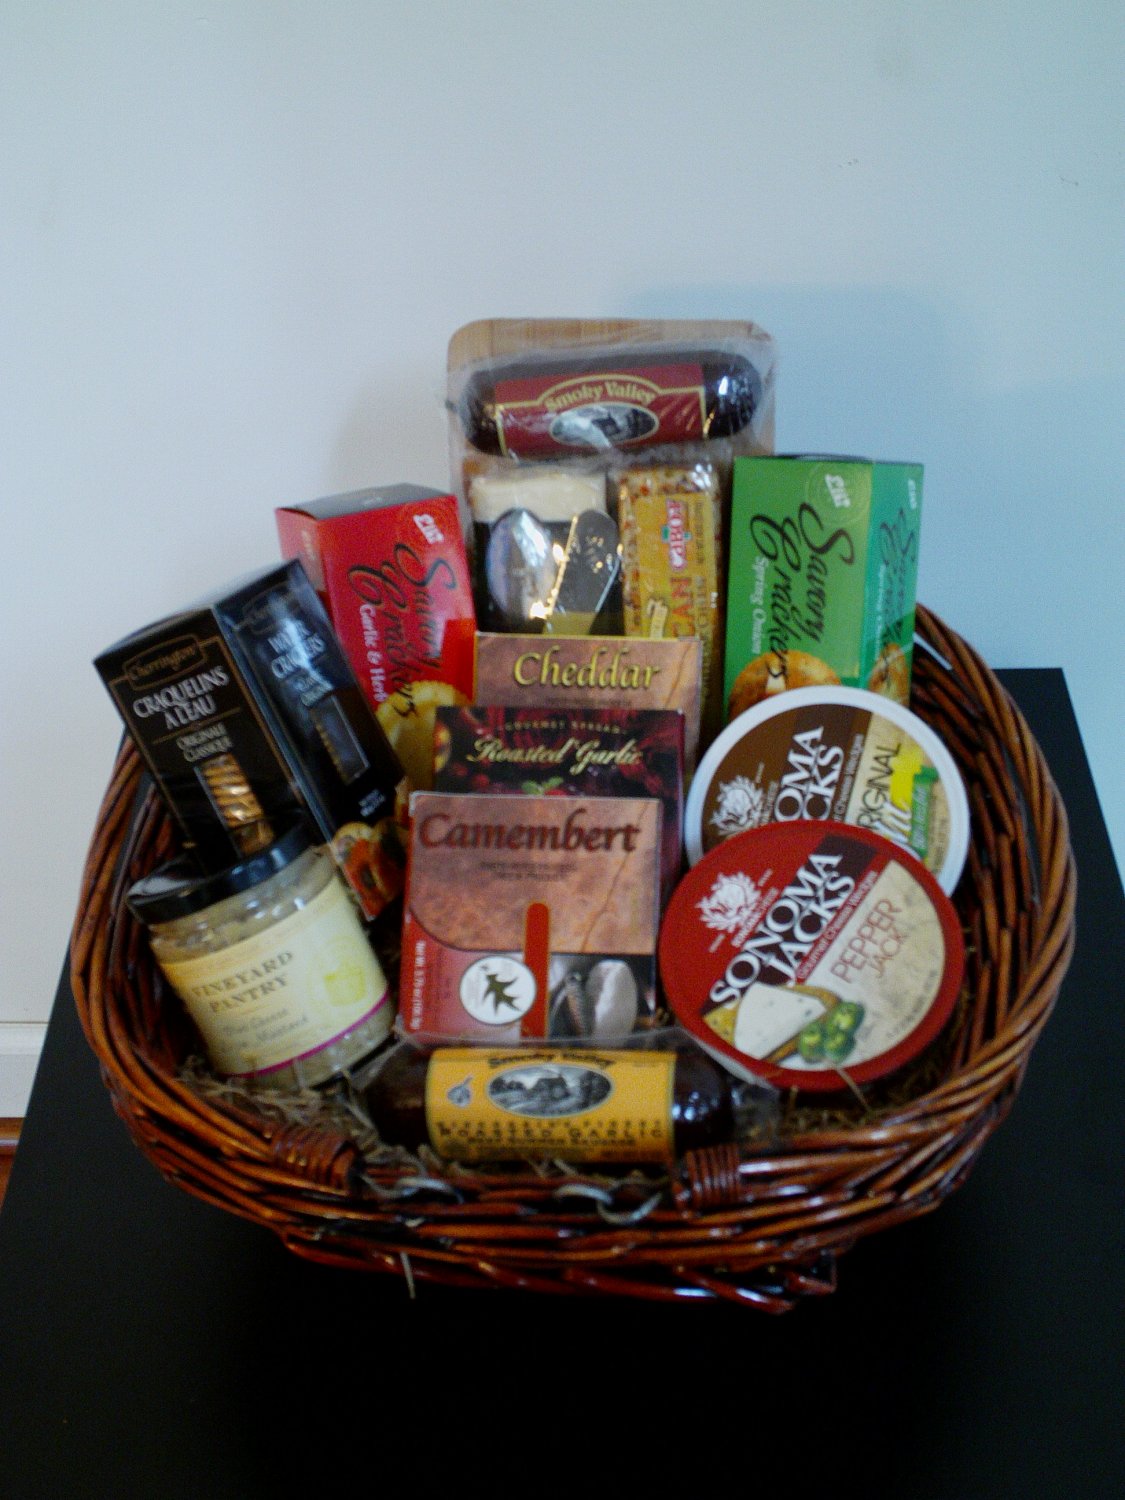 The Entertainer Cheese & Cracker Gift Basket